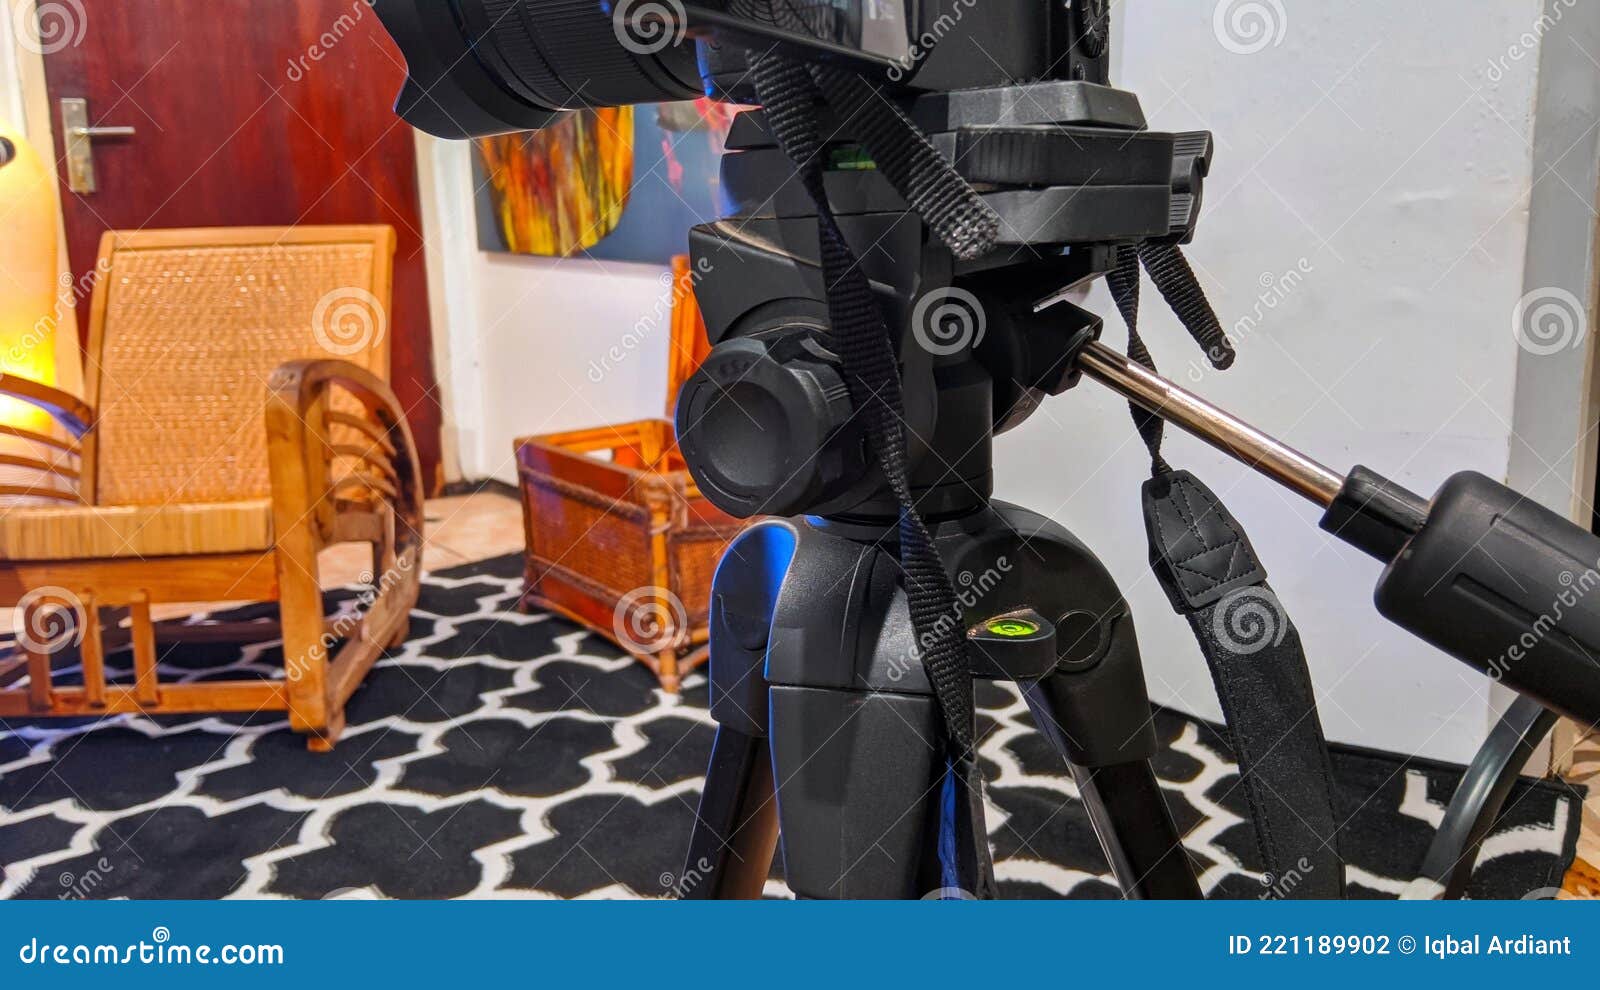 a tripod is used to stabilize the camera when shooting.